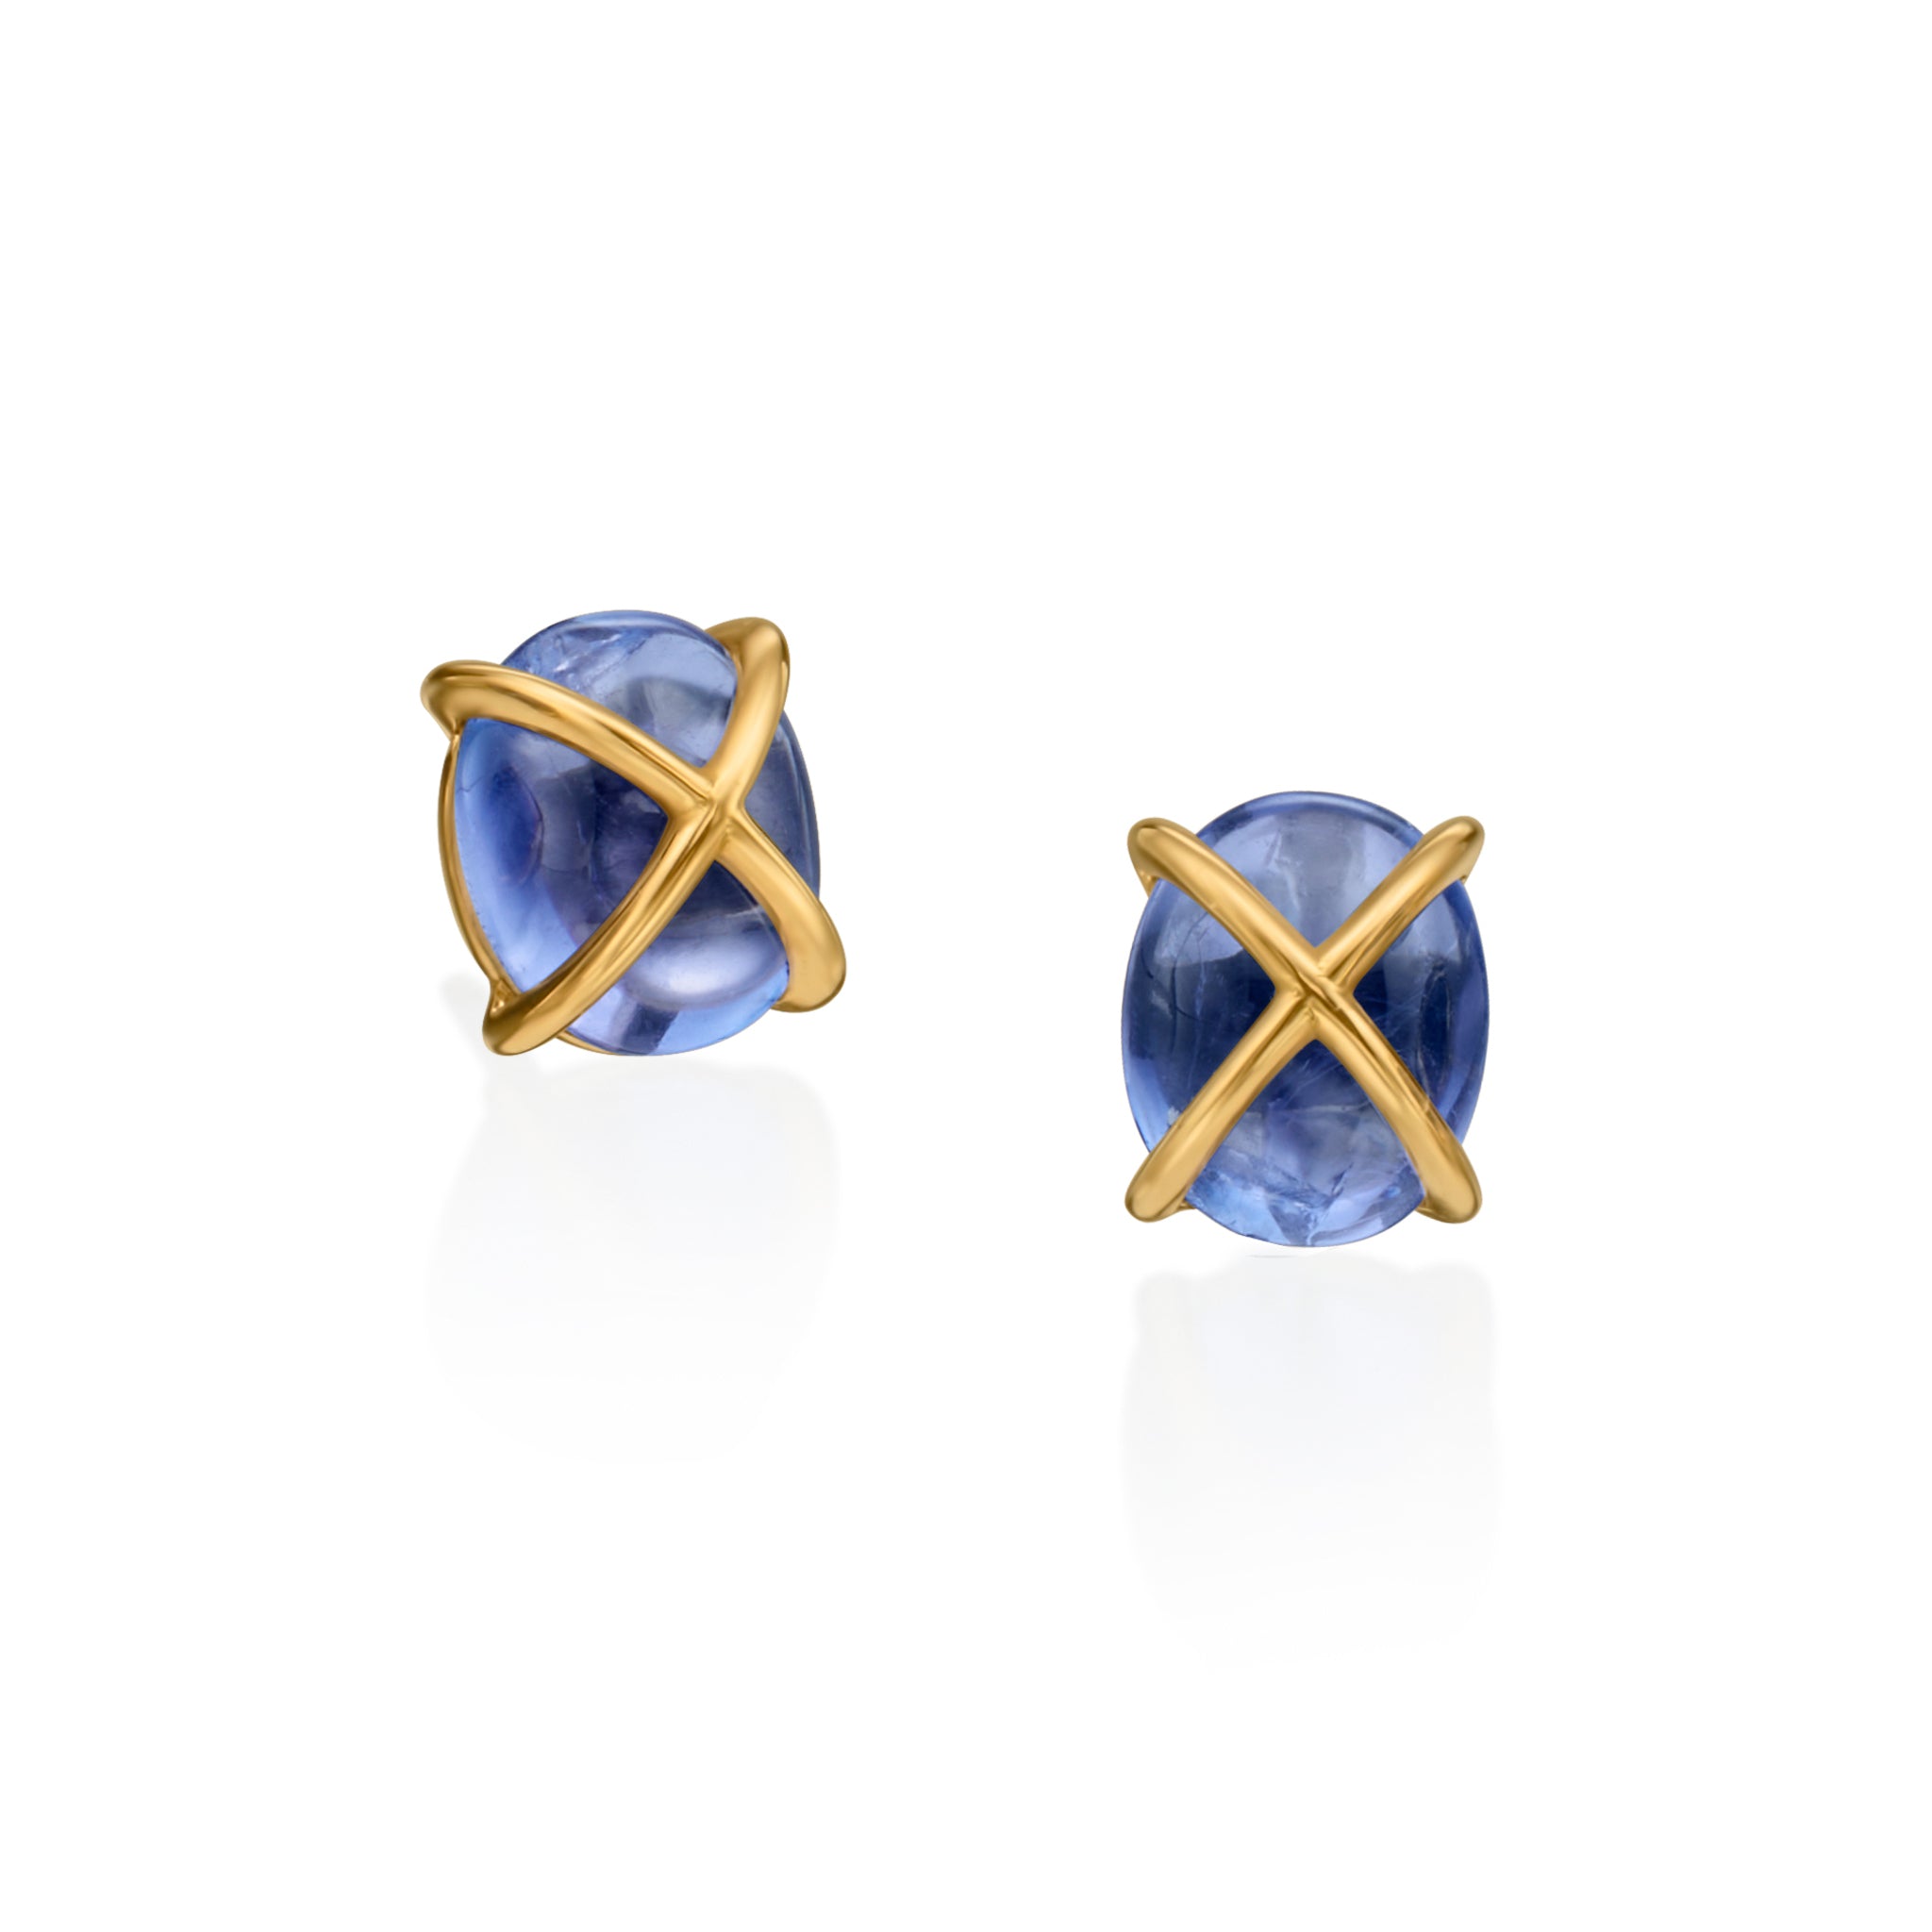 Cabochon Tanzanite and Gold Earrings